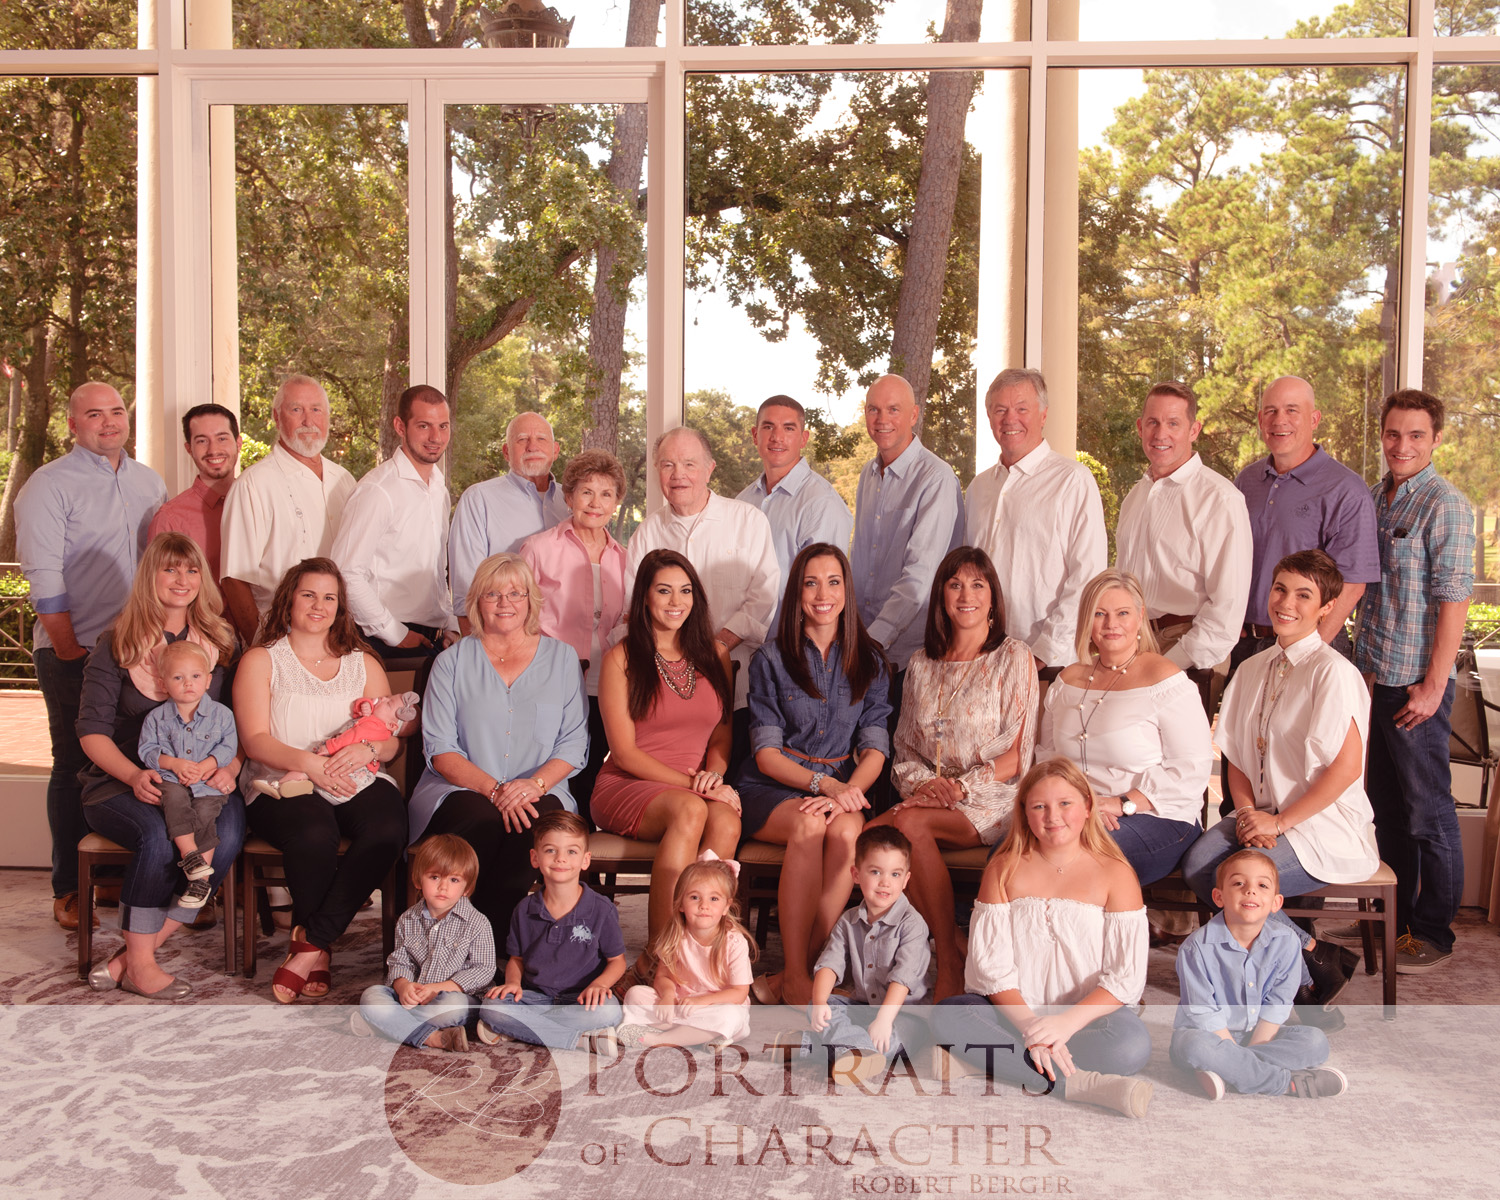 Houston Corporate Group Photography Houston Family Portrait Photography Studio Innovative Images Photography by Robert Berger serving Houston Katy Fort Bend Sugarland Memorial Spring Branch The Woodlands Texas 11211 Richmond Ave Suite B101 Houston TX 77082 Houston family photographer for Children Kids Infants Portrait Photography Studio Portraits of Character by Robert Berger Innovative Images Photography by Robert Berger